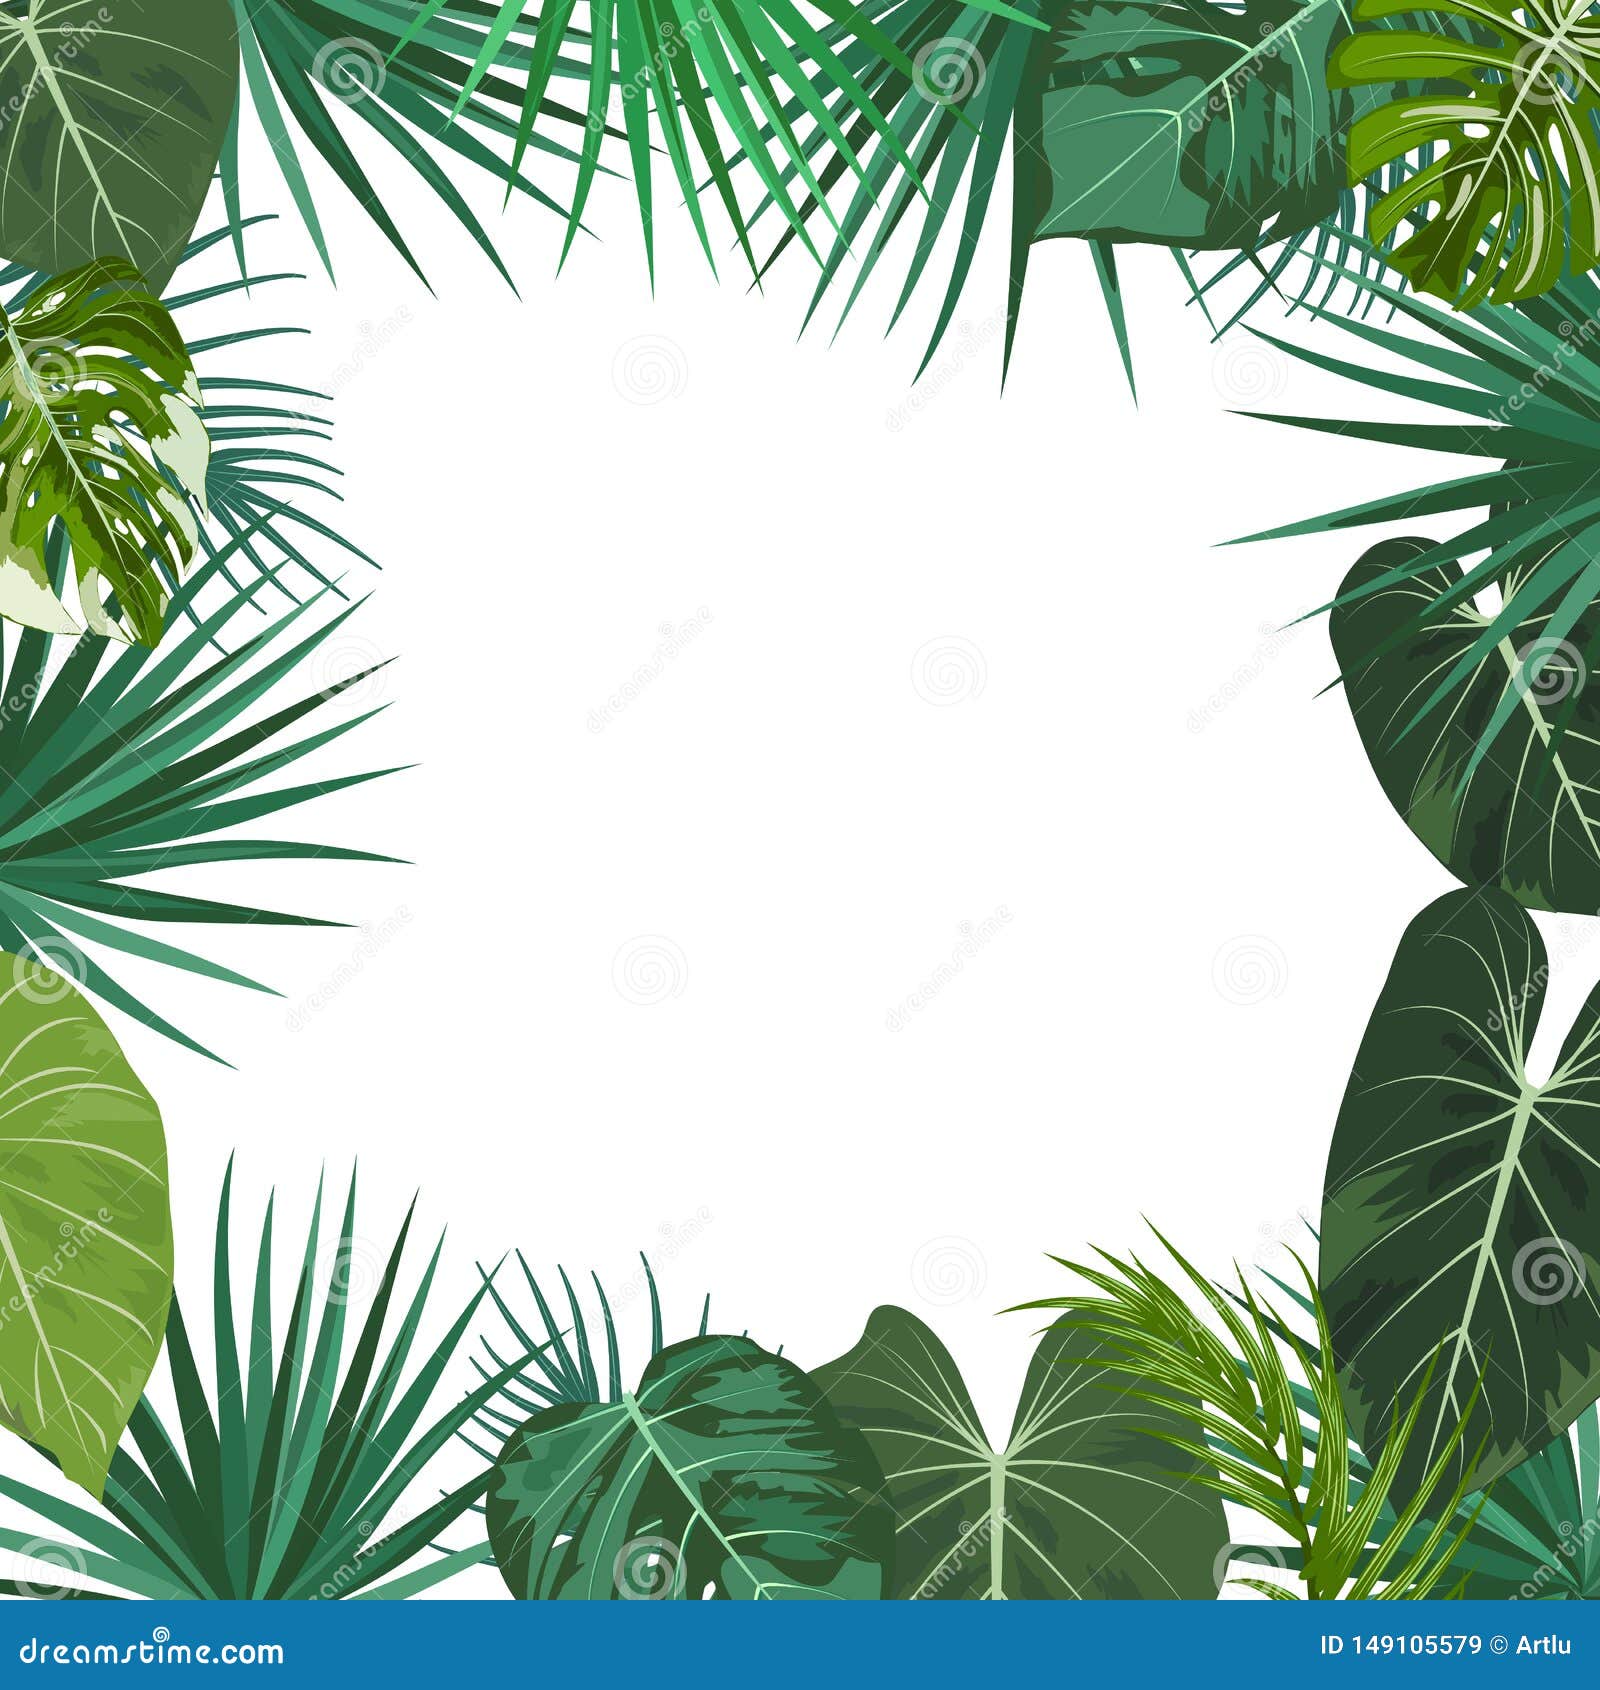 Vector Tropical Jungle Frame with Palm Trees, Flowers and Leaves on ...